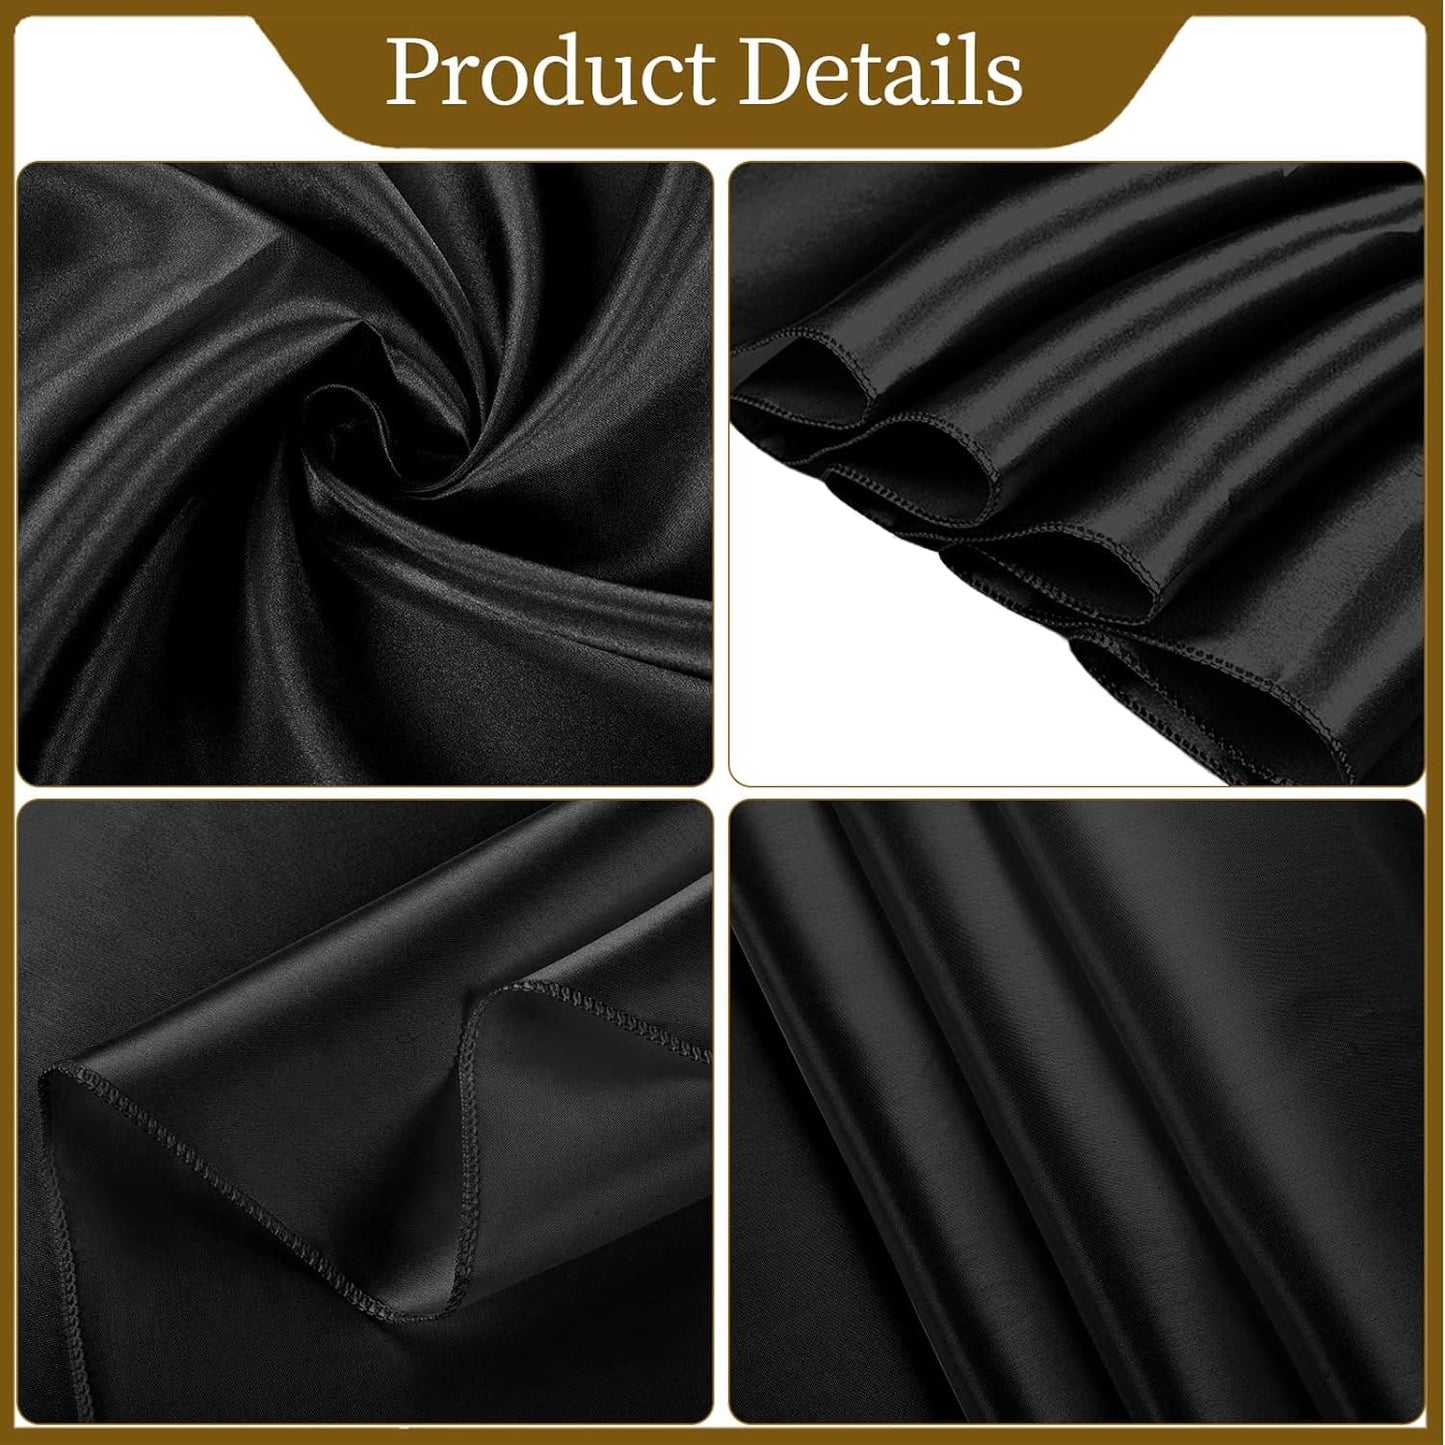 12 Pack Satin Tablecloth 57 x 108 Inch